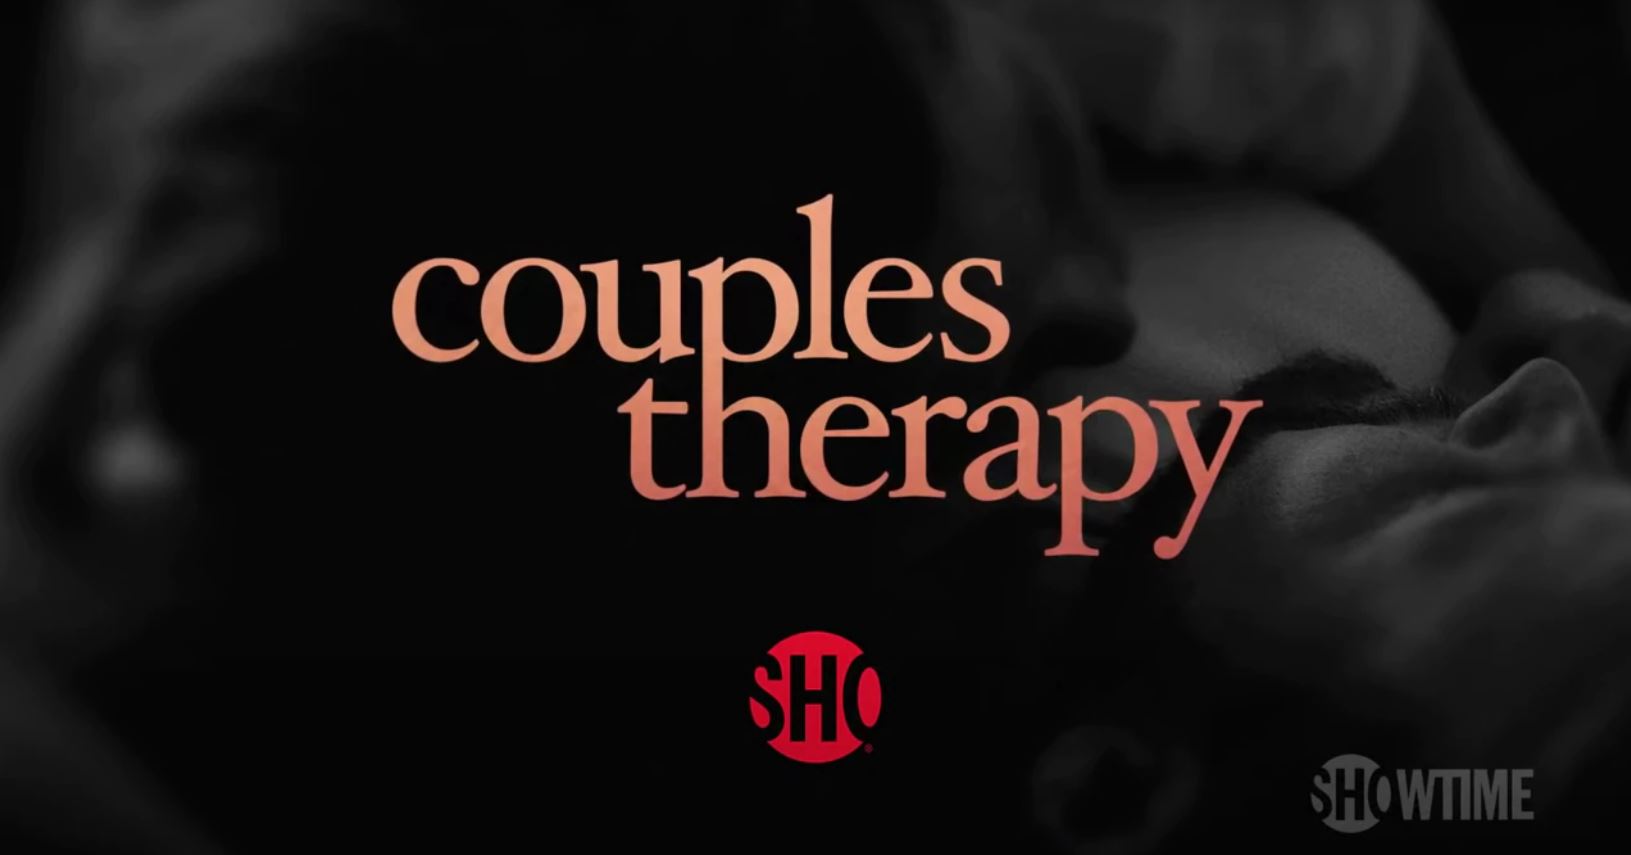 Couples Therapy Season 3 on Showtime